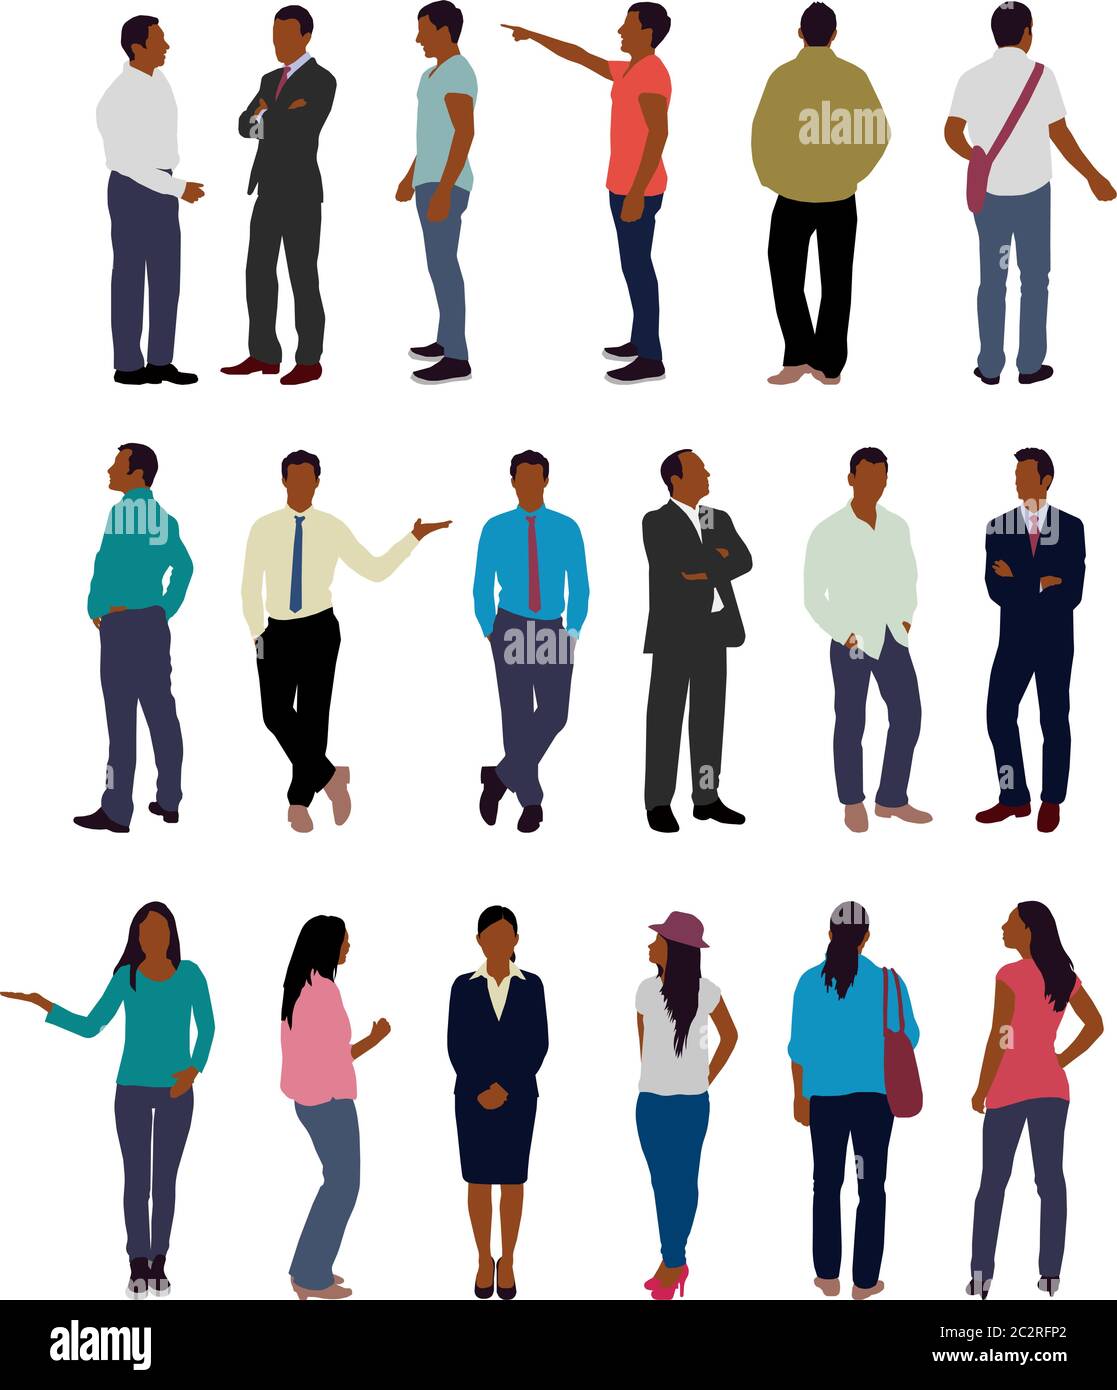 Faceless standing people vector illustration set (black people) Stock Vector